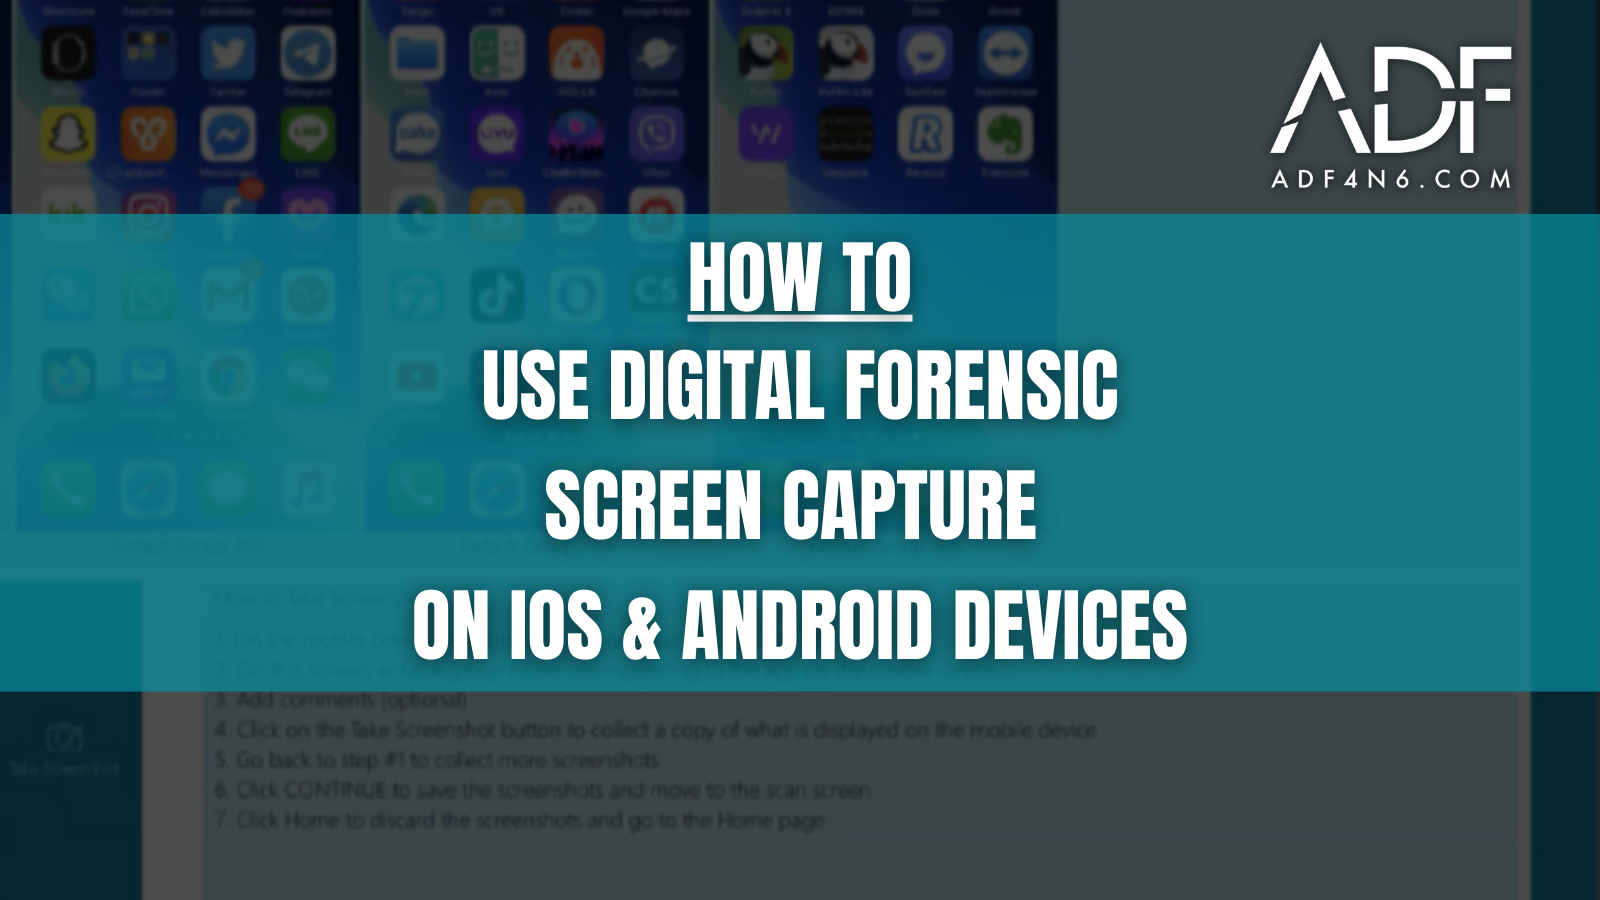 Learn To Use Digital Forensic Screen Capture on iOS & Android Devices